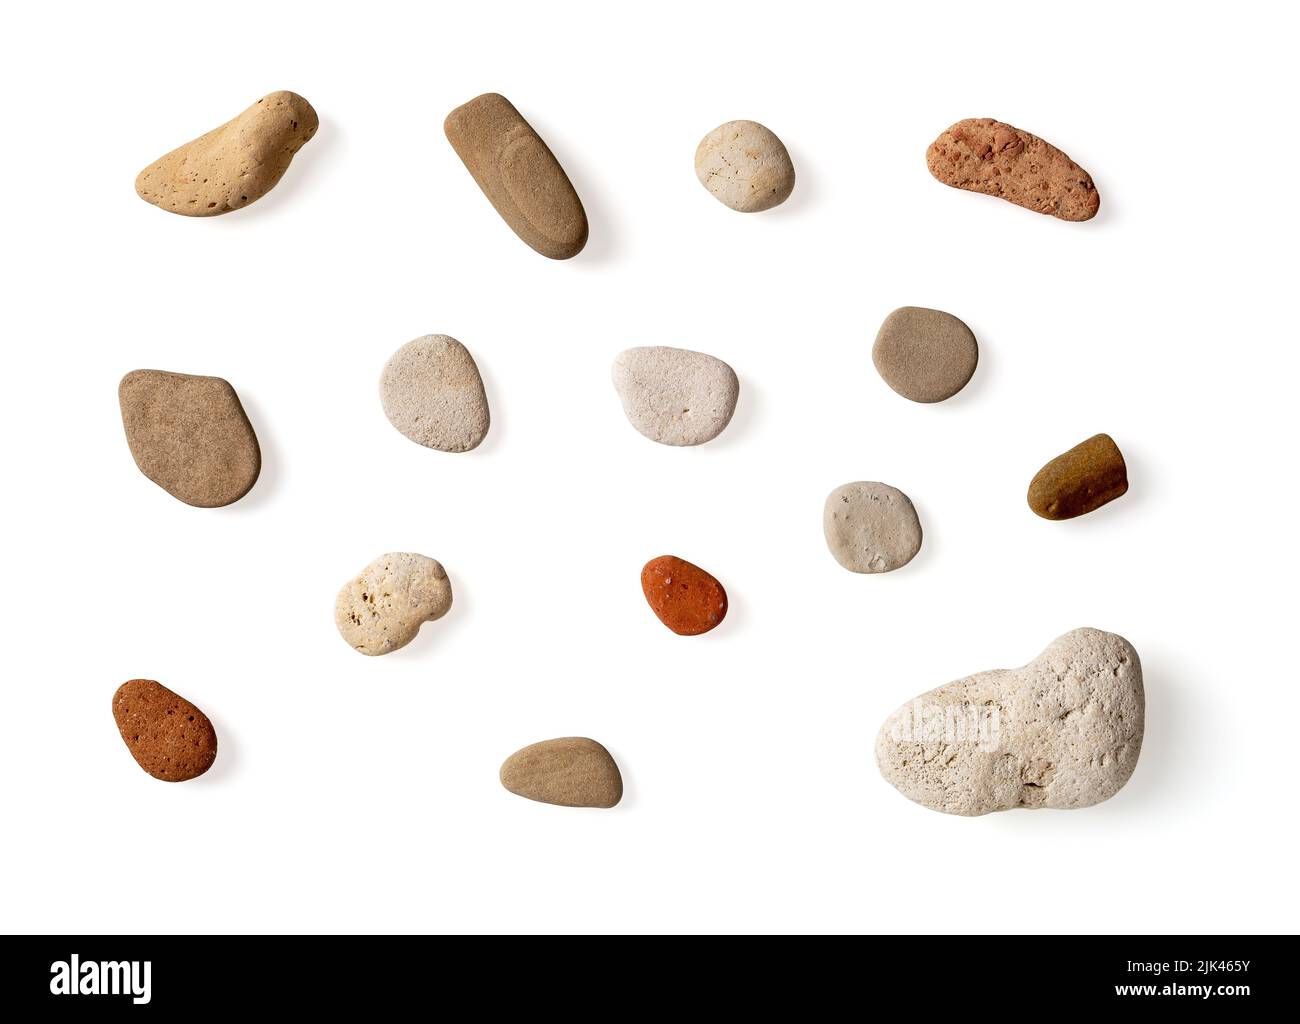 Multicolored sea pebbles set isolated on a white background. Rounded colorful stones from a beach. Design element for summer travel, sea vacation. Stock Photo